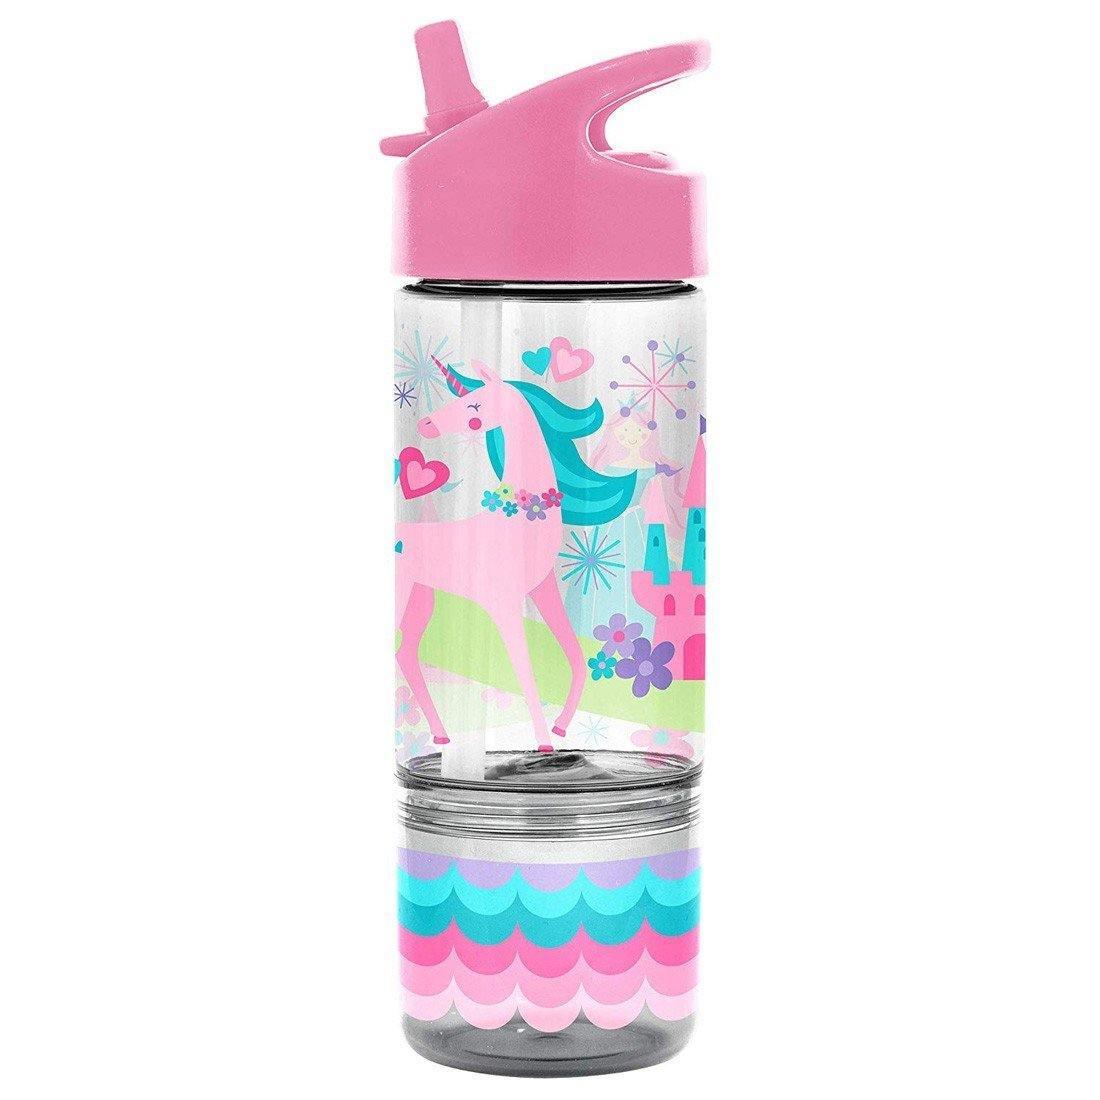 Stephen Joseph Sip And Snack Unicorn Water Bottle - BumbleToys - 2-4 Years, 5-7 Years, Cecil, Girls, School Supplies, Water Bottle